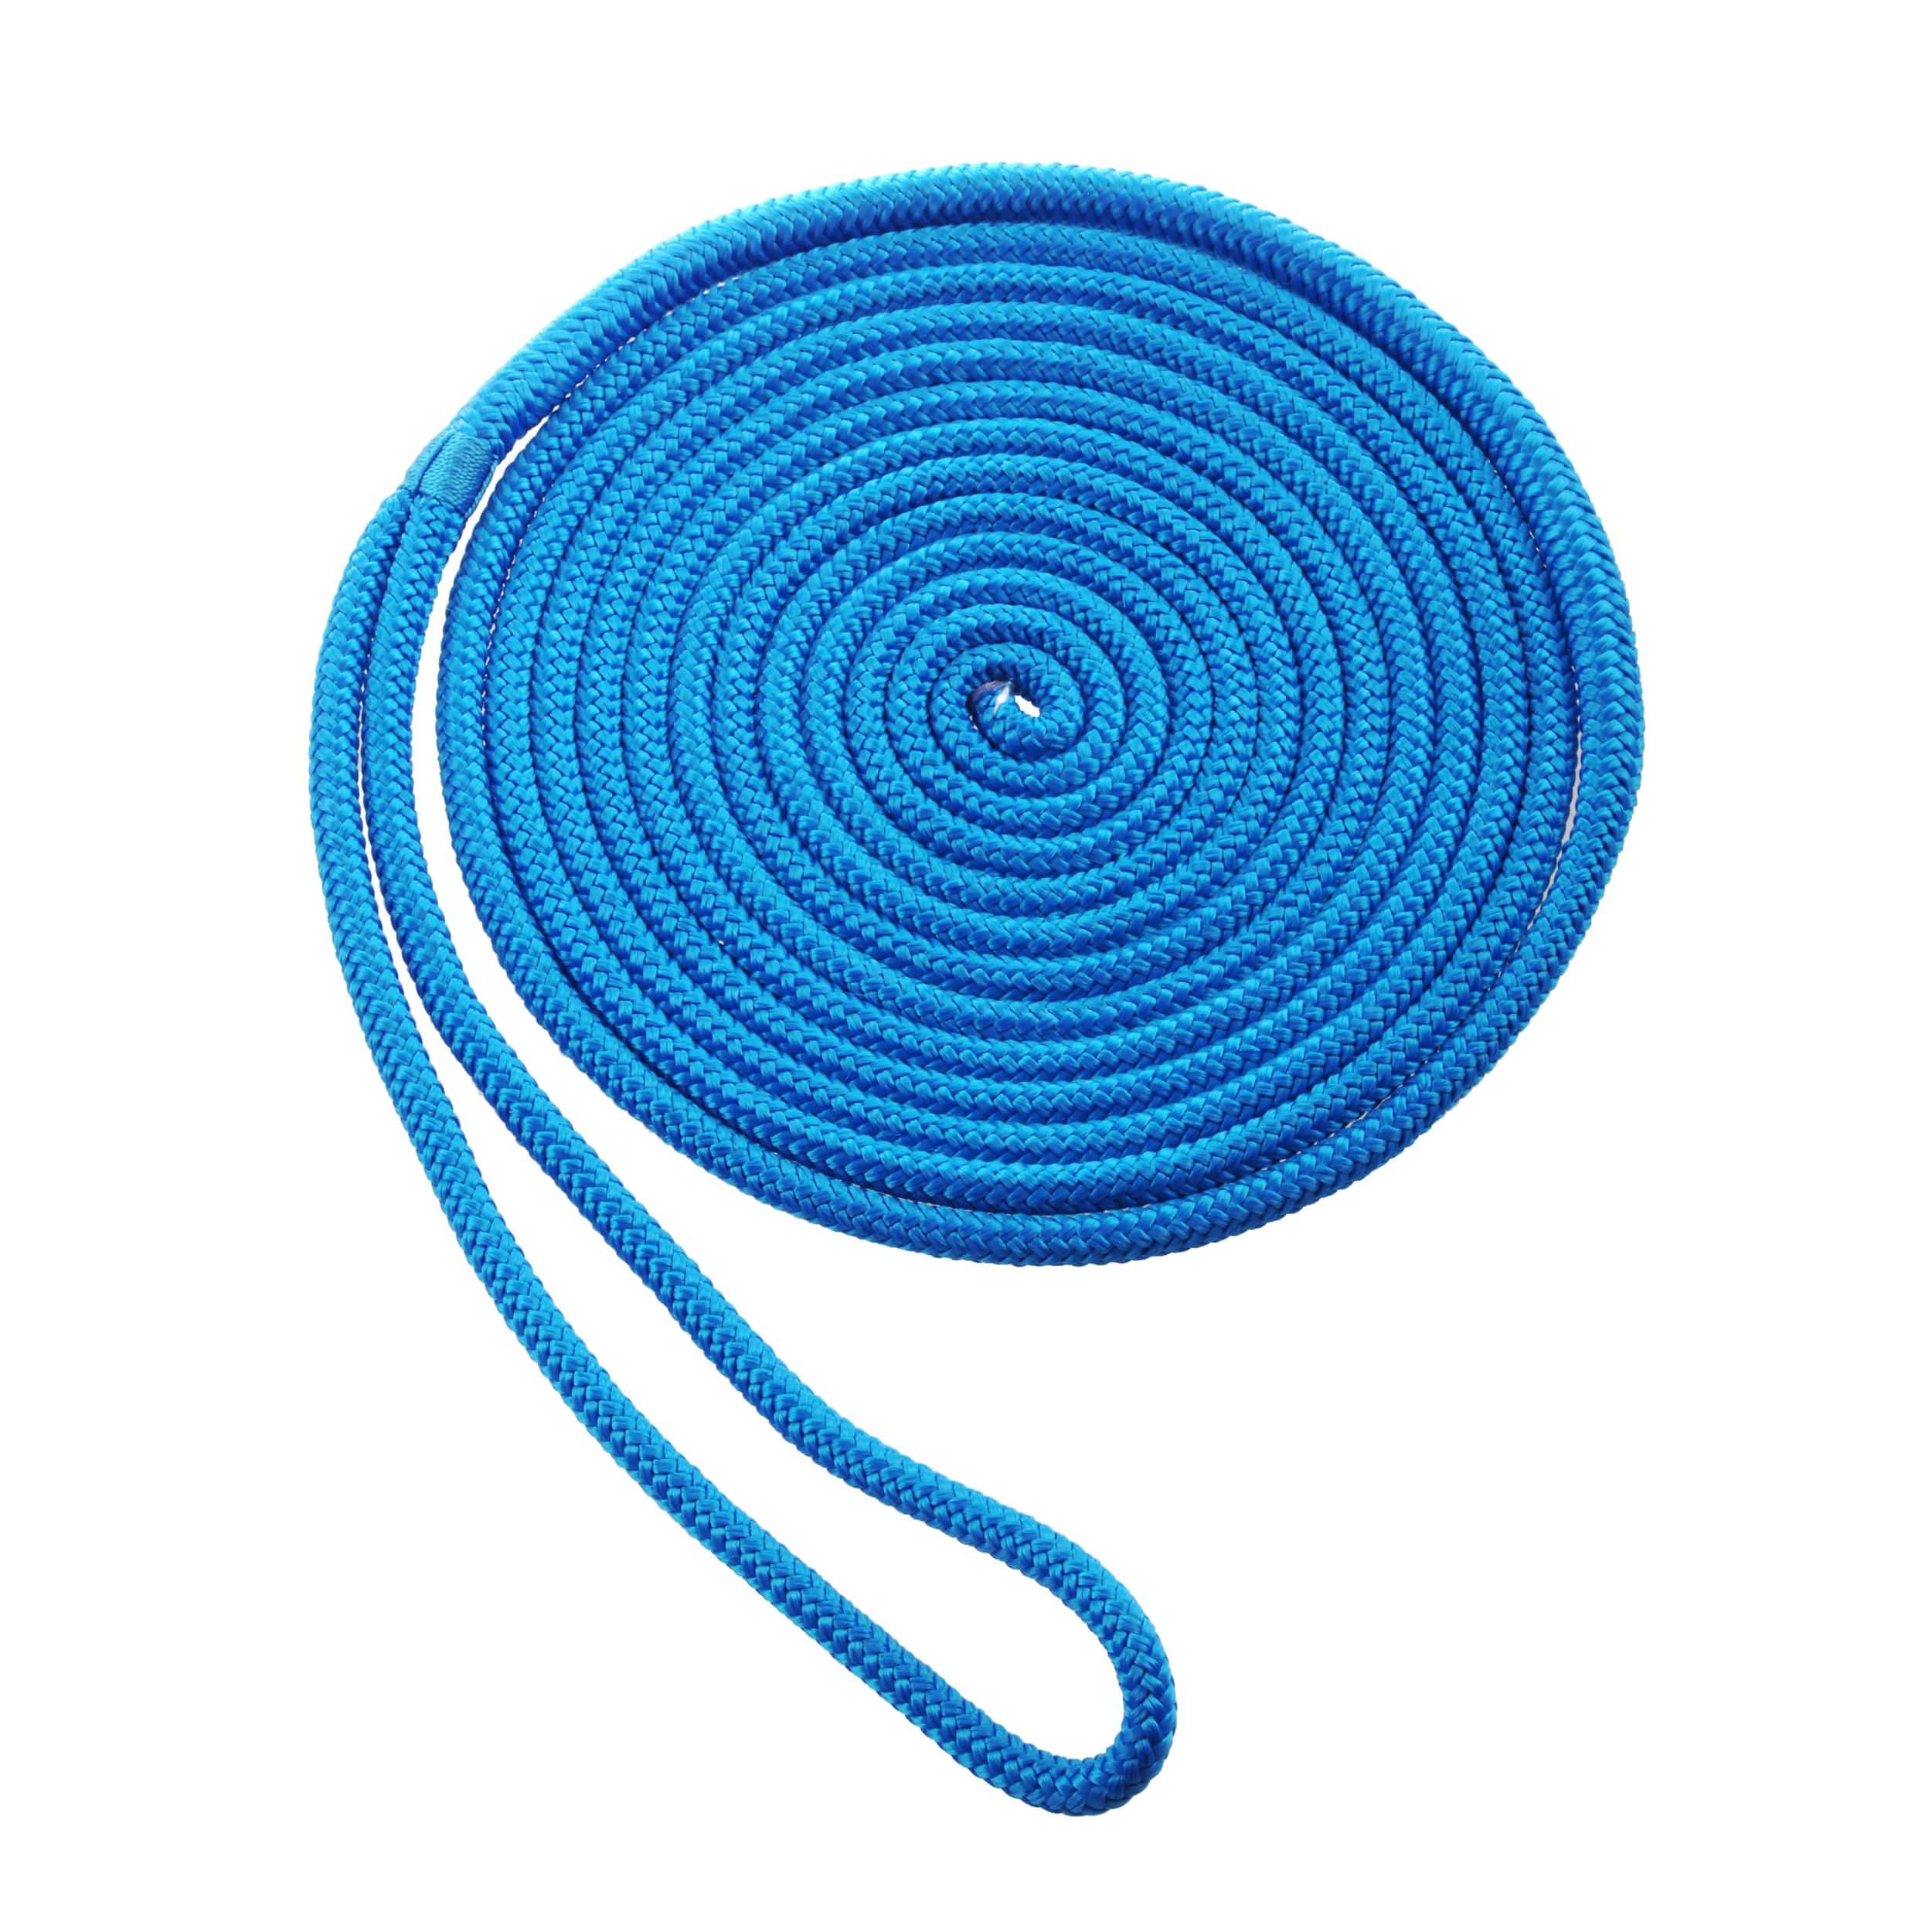 Blueline MFP Double Braided Dock Line/Rope, Blue, Assorted Sizes